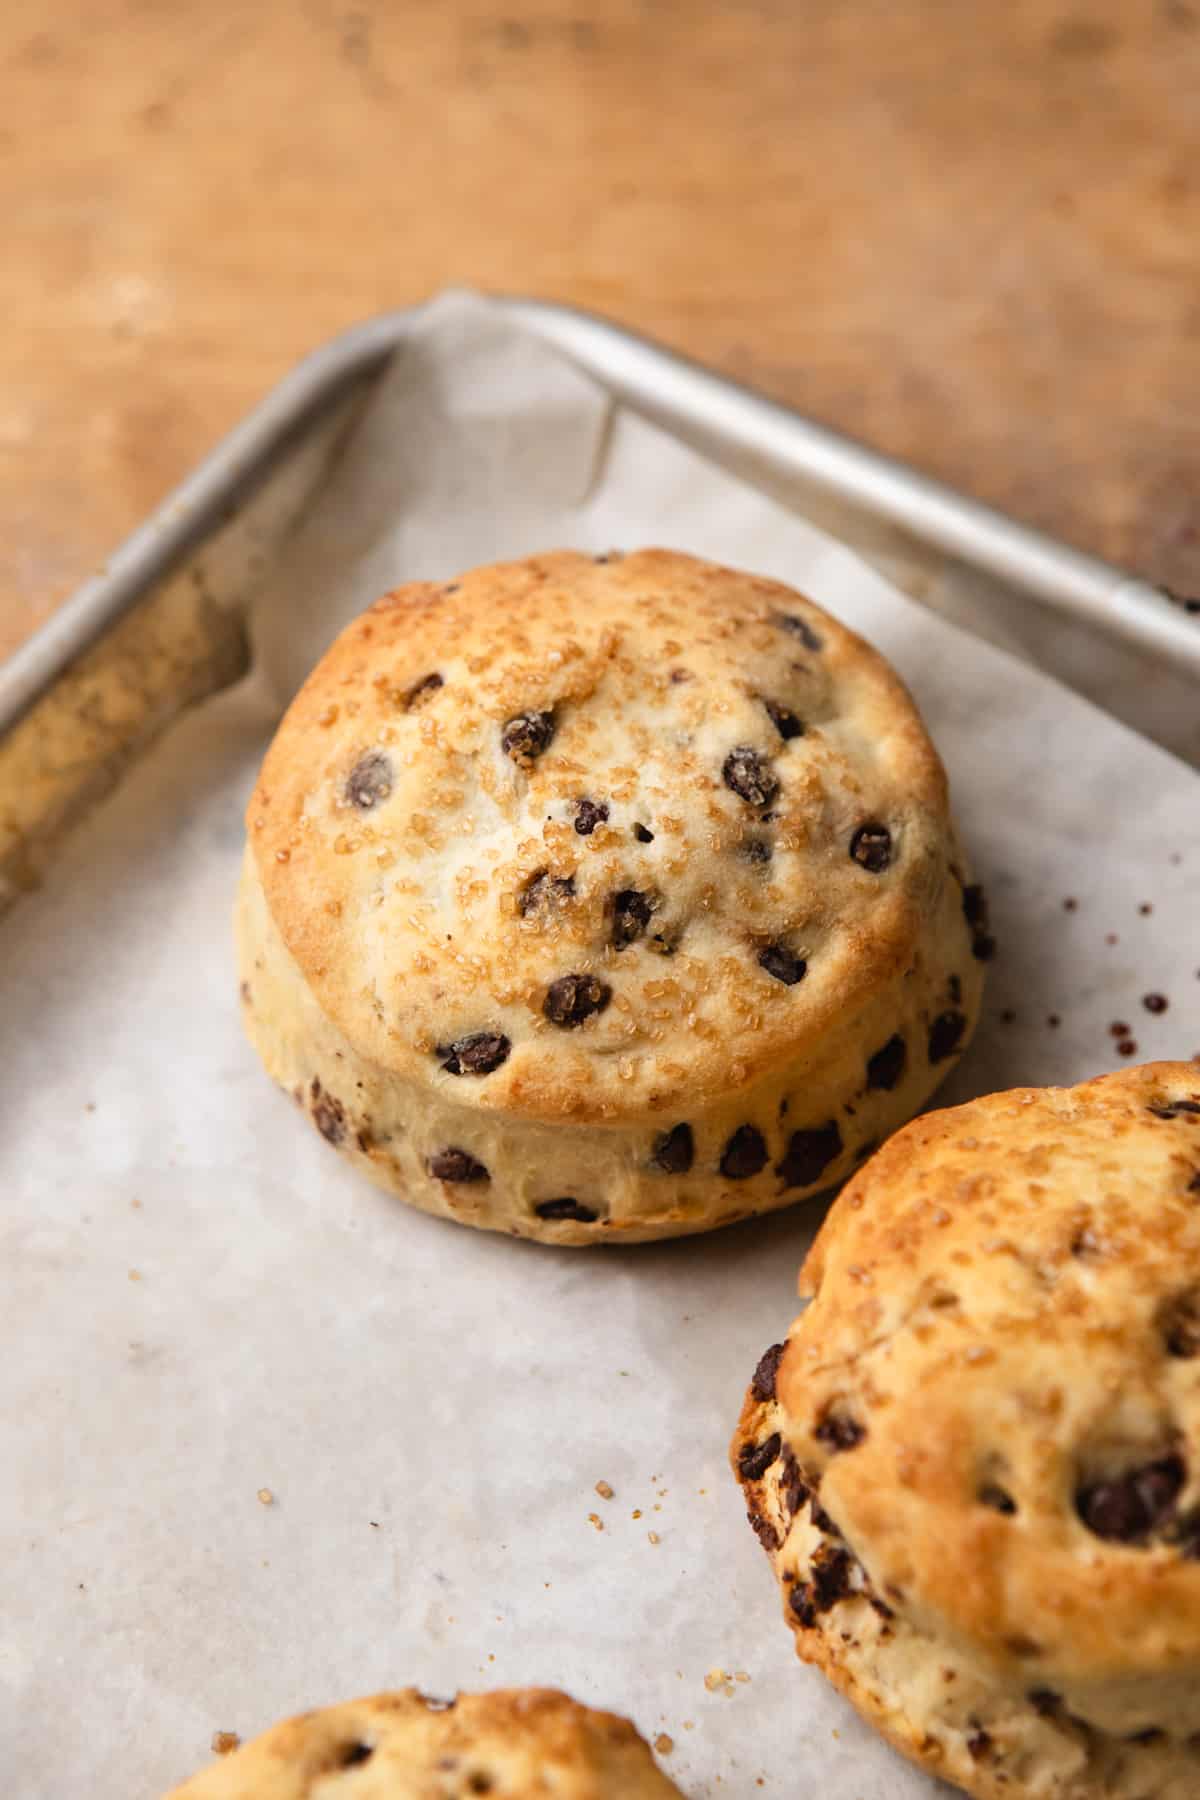 A chocolate chip biscuit on a parchment lined baking tray.